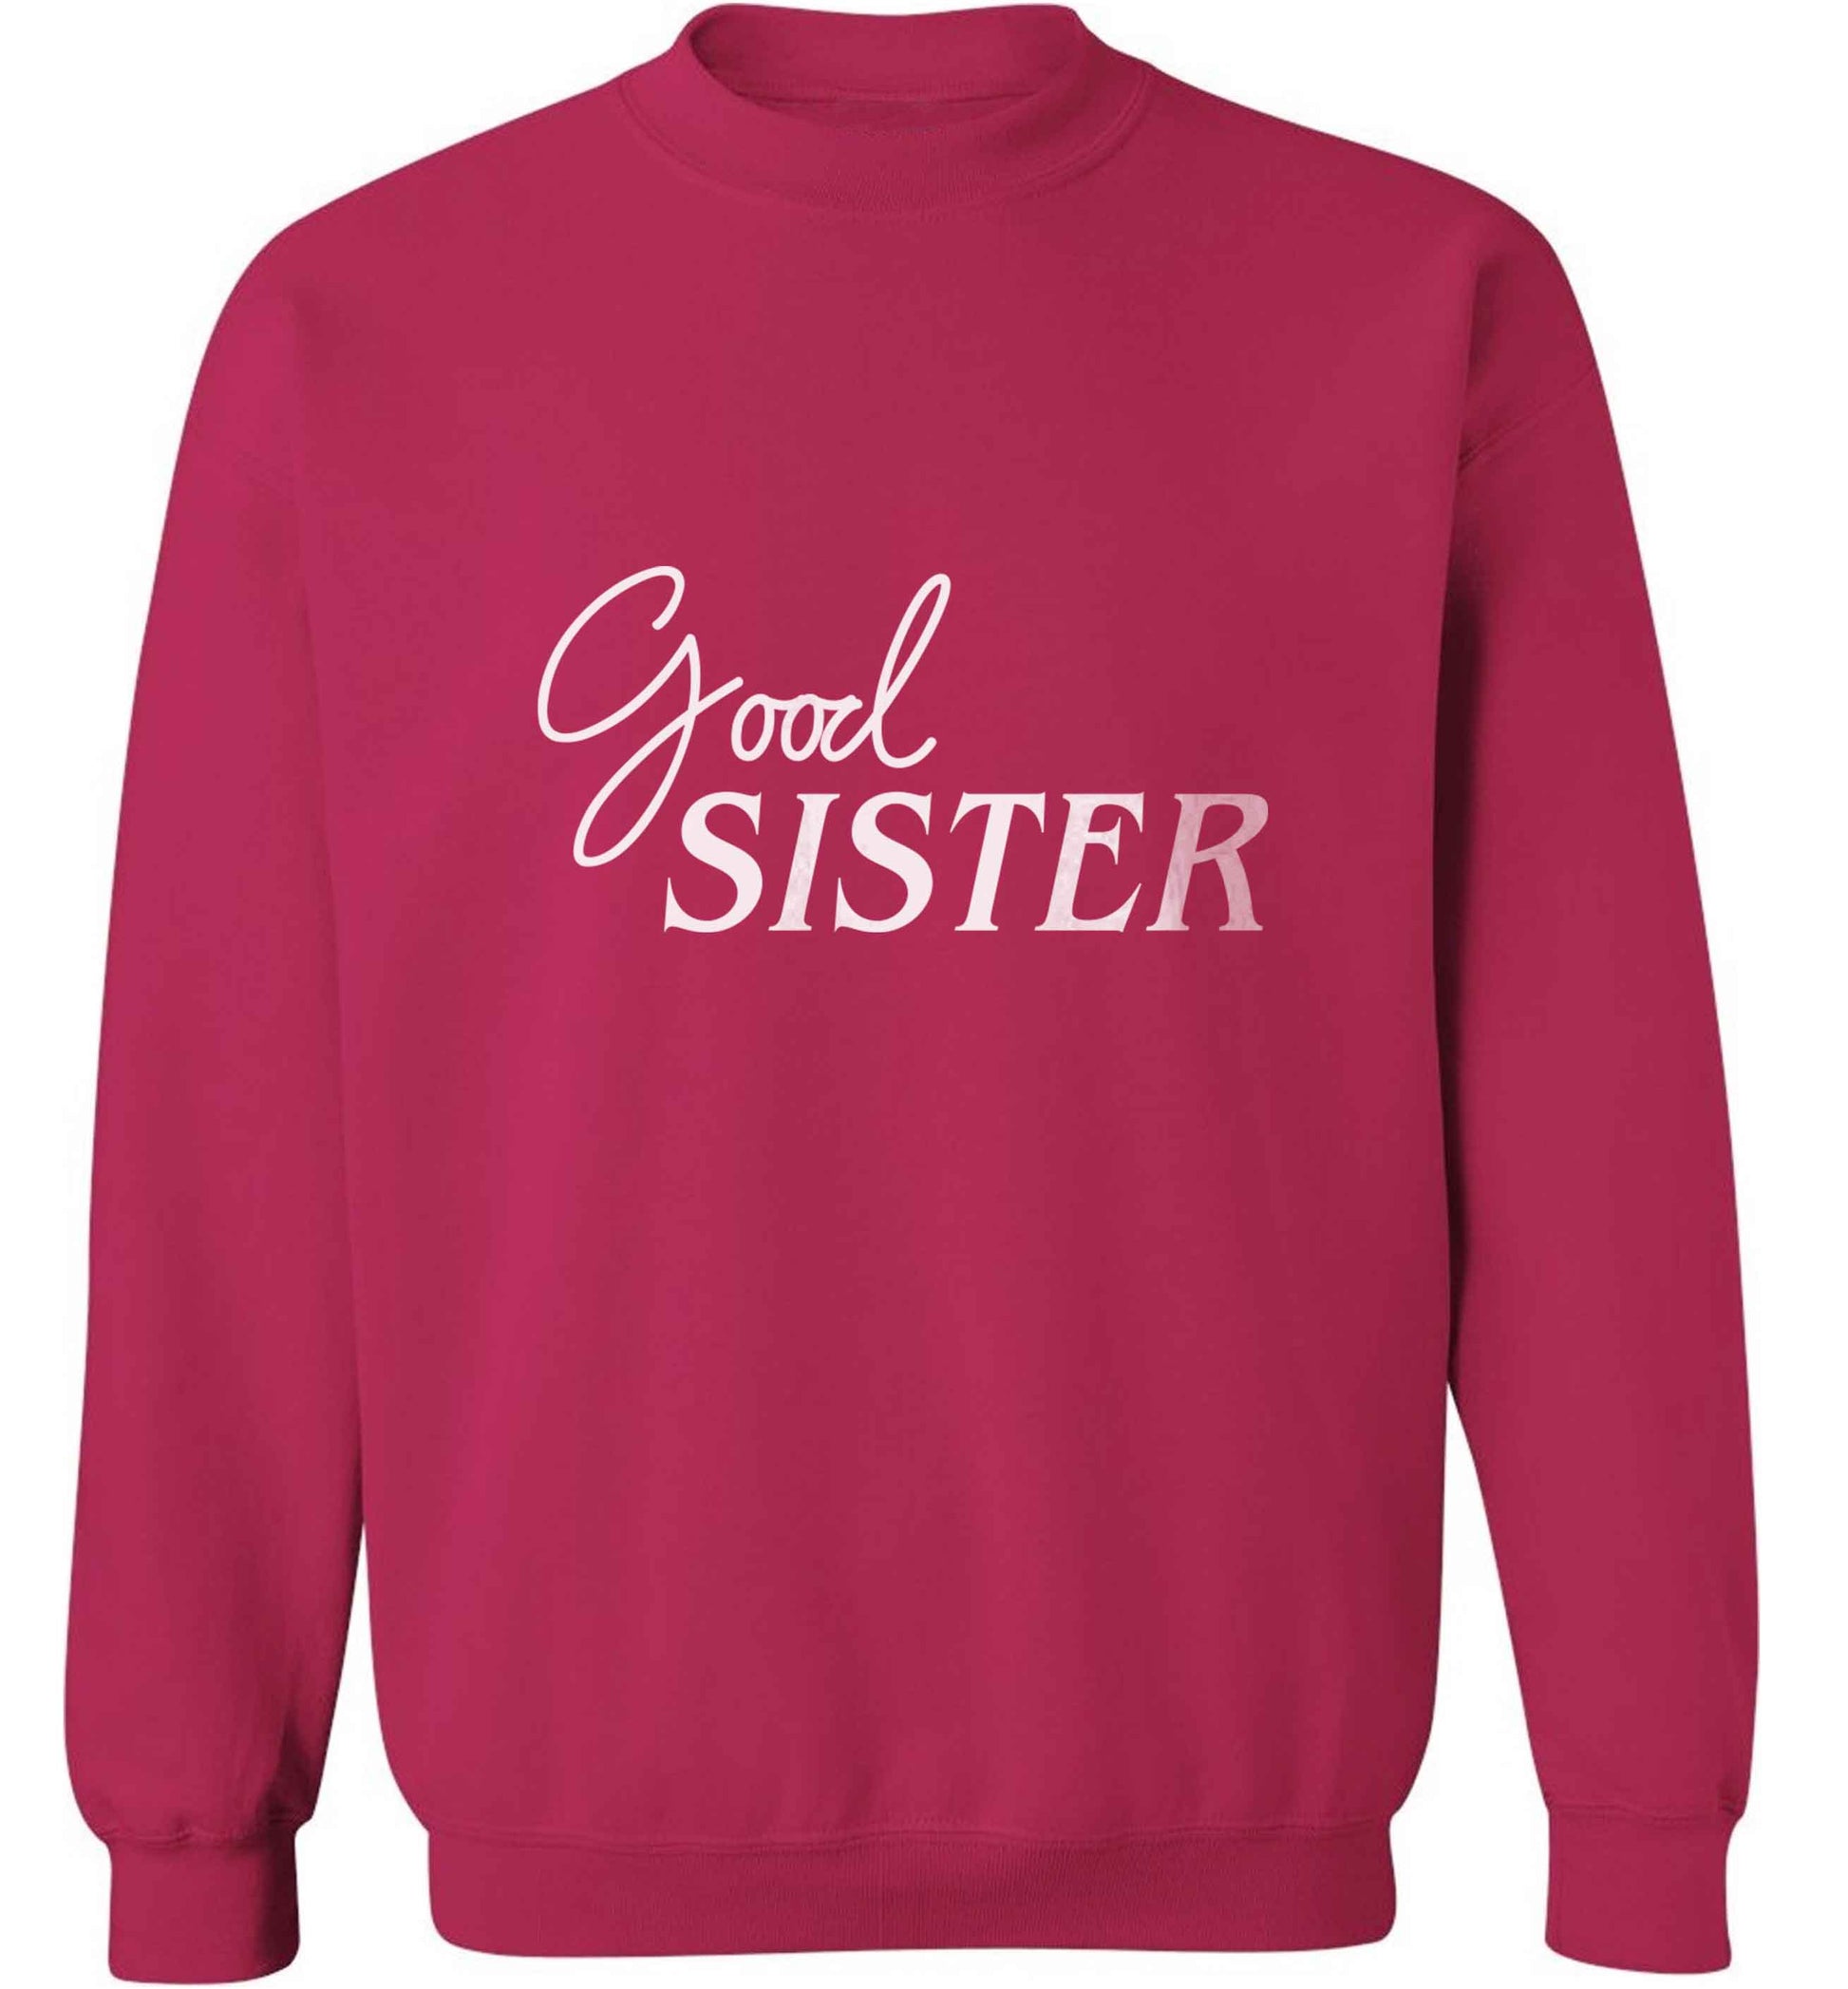 Good sister adult's unisex pink sweater 2XL